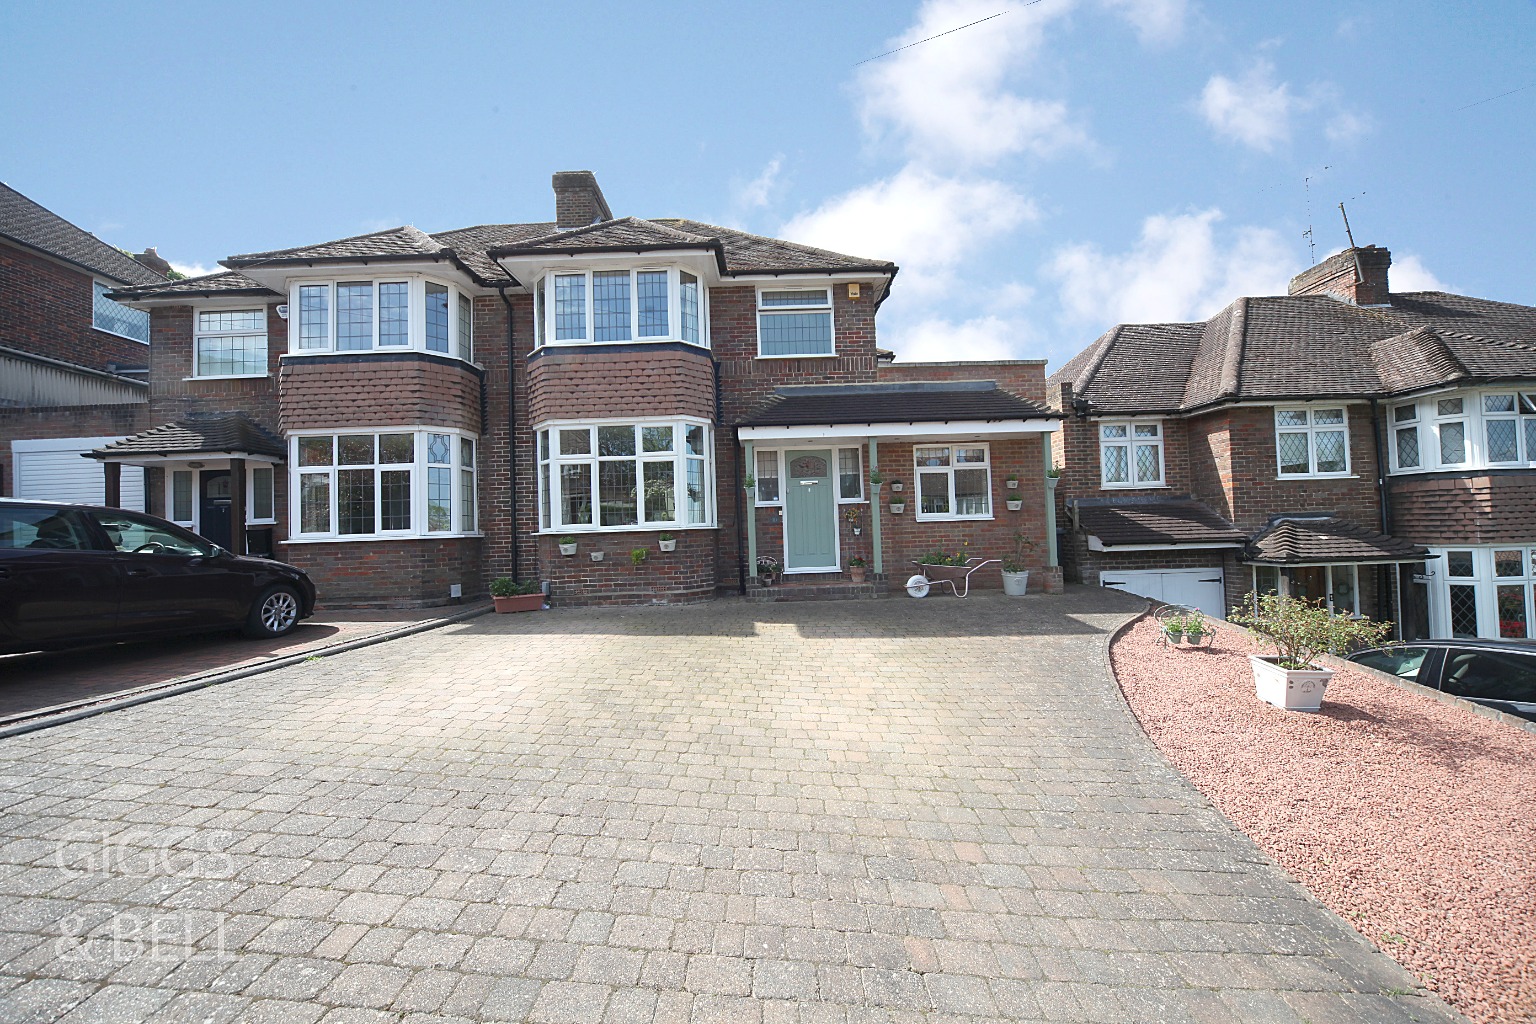 3 bed semi-detached house for sale in Knoll Rise, Luton - Property Image 1